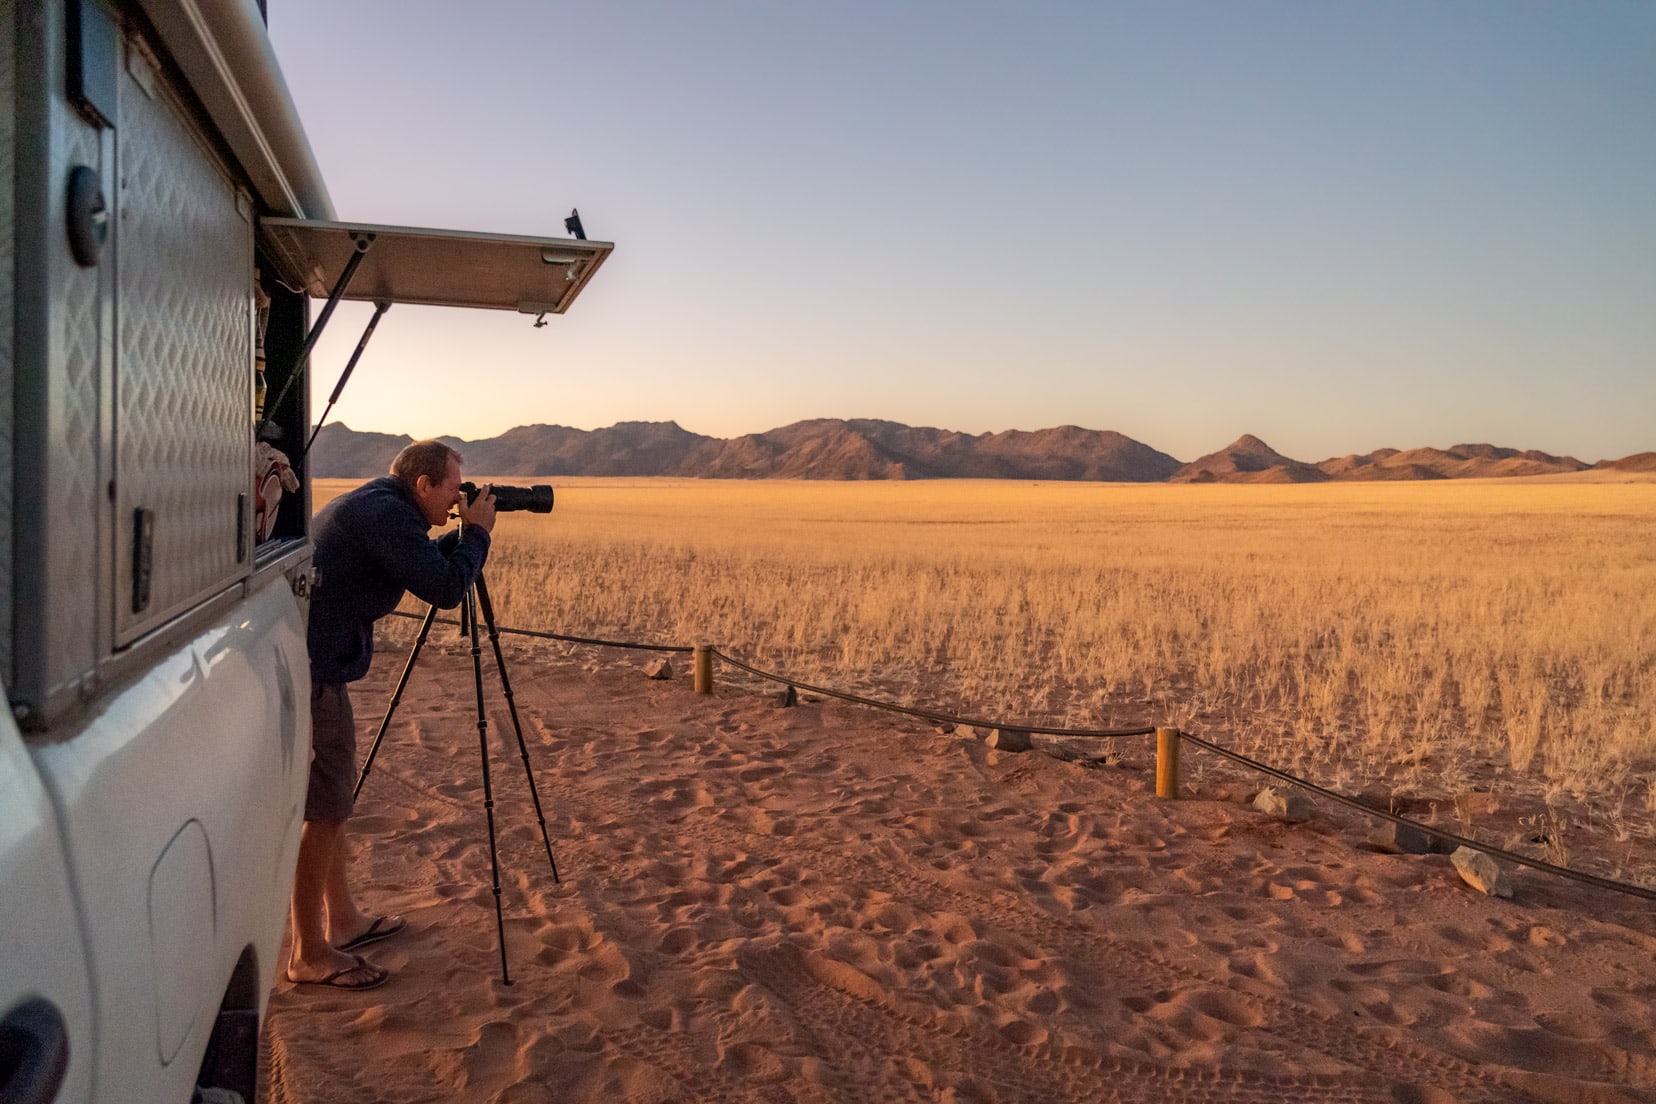 lars with camera taking photos fo the landscape beside the camper at Kanaan desert retreat namibia